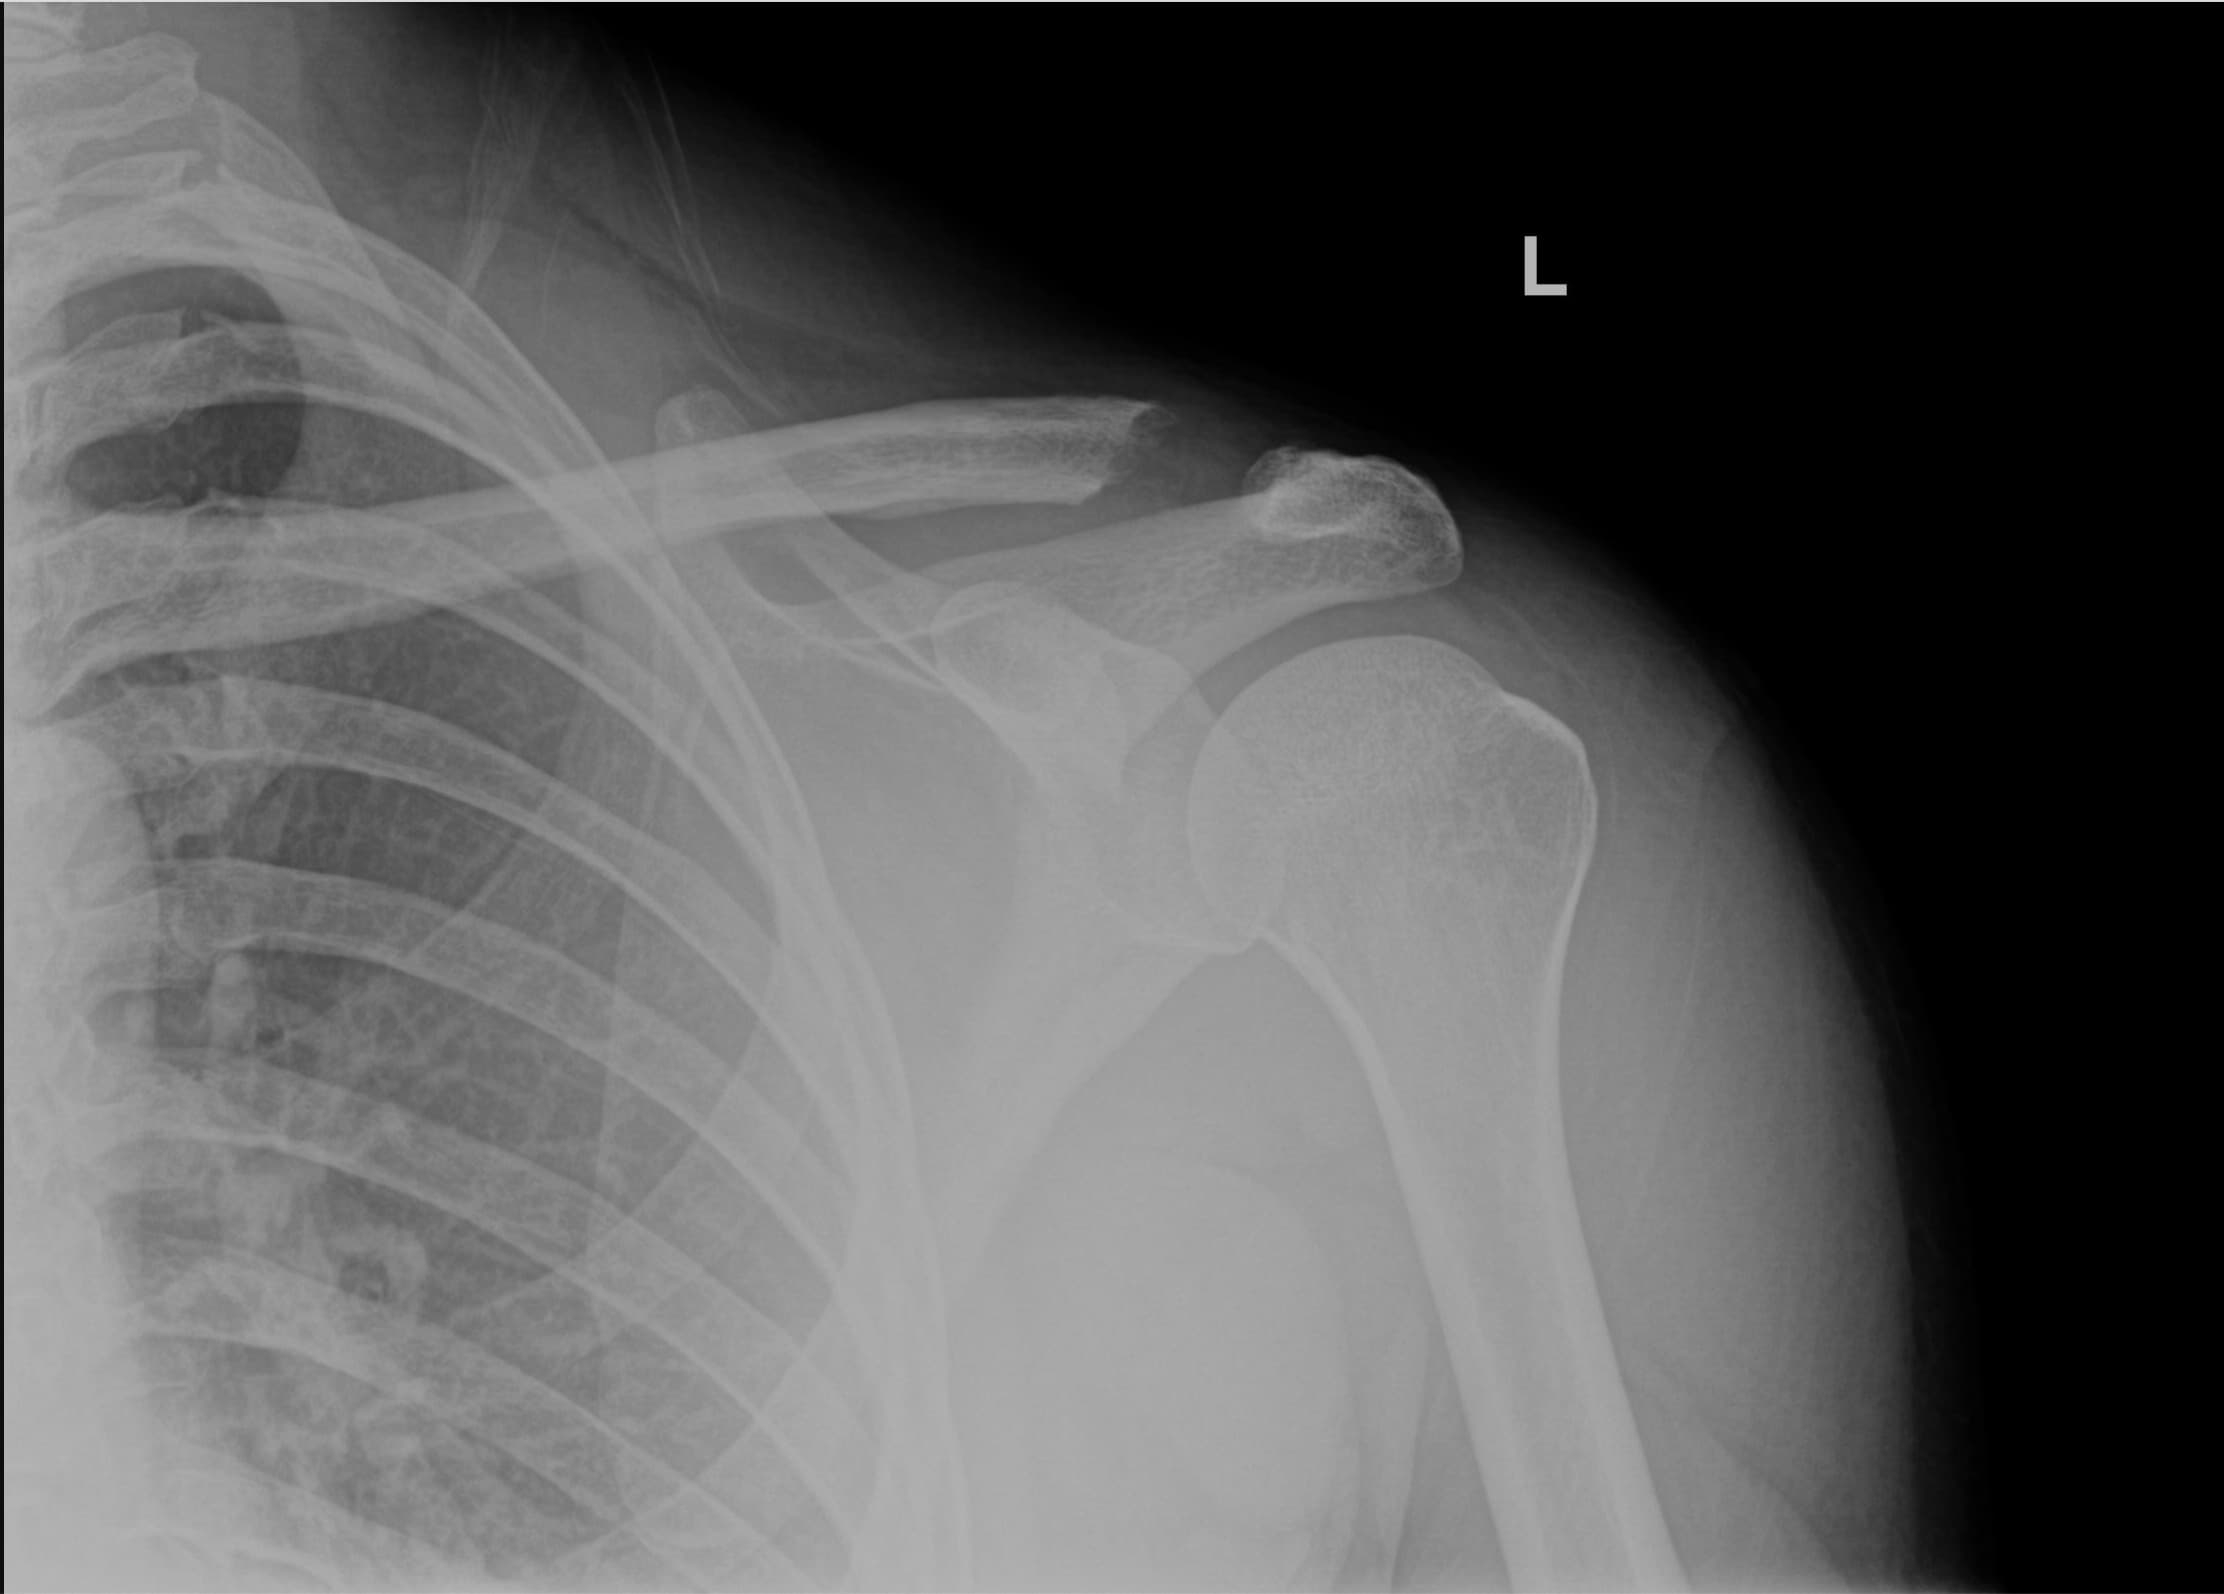 Post-Operative X-RAY of patient clavicle